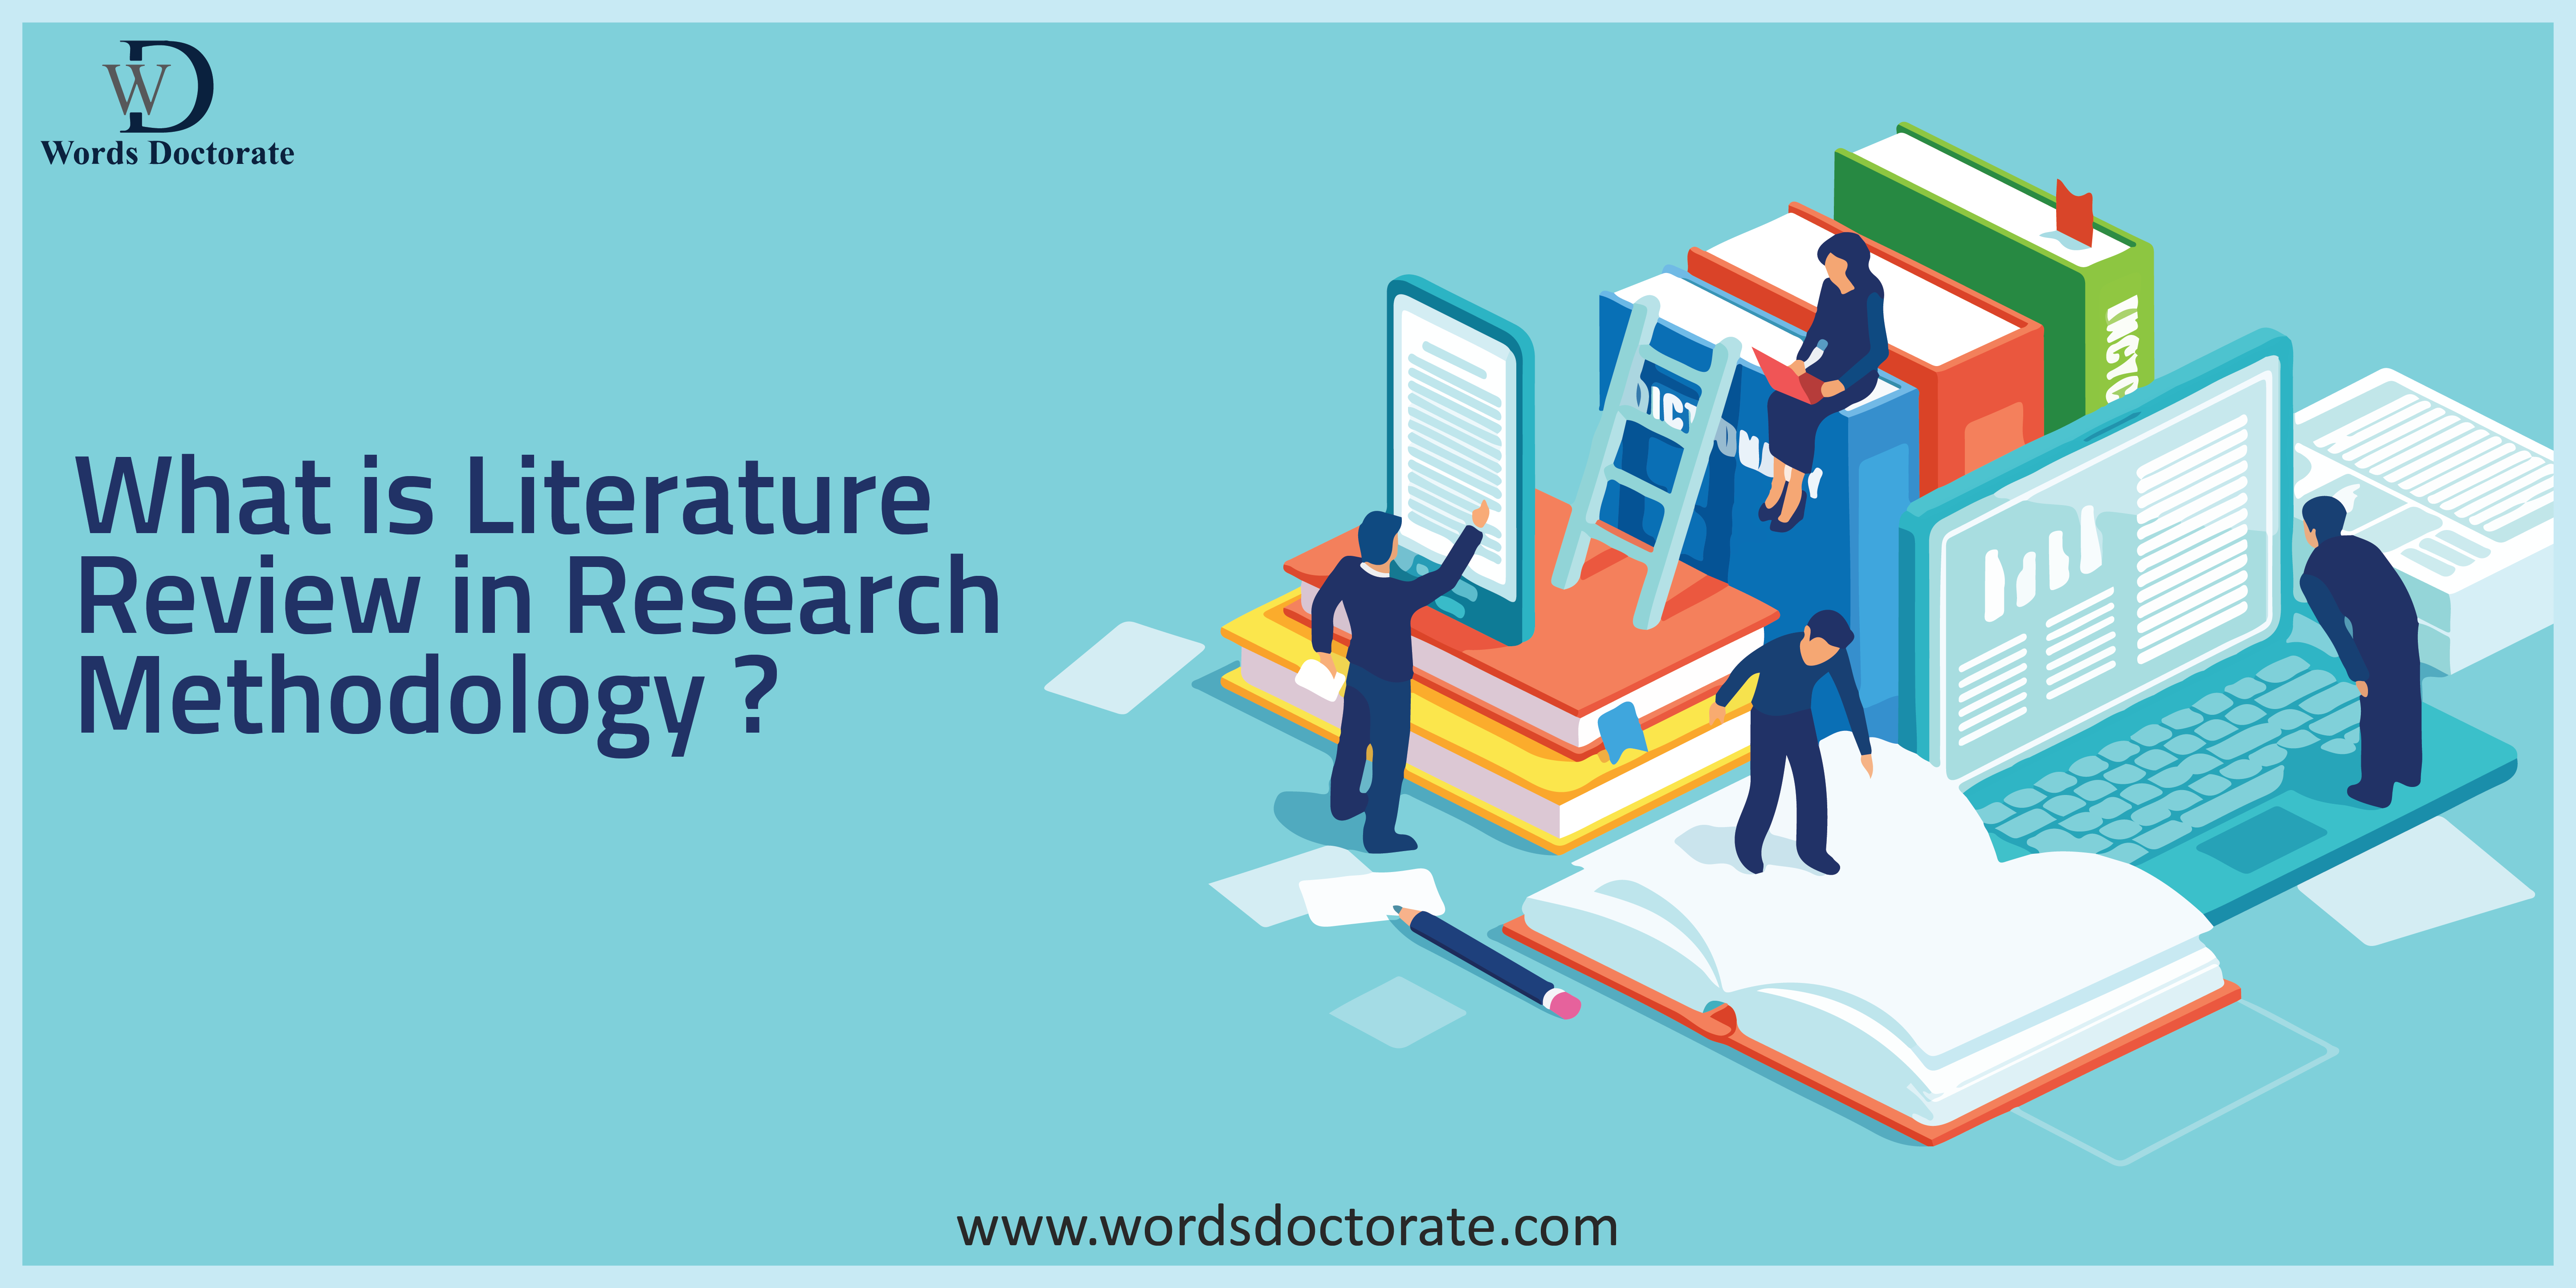 What is Literature Review in Research Methodology?